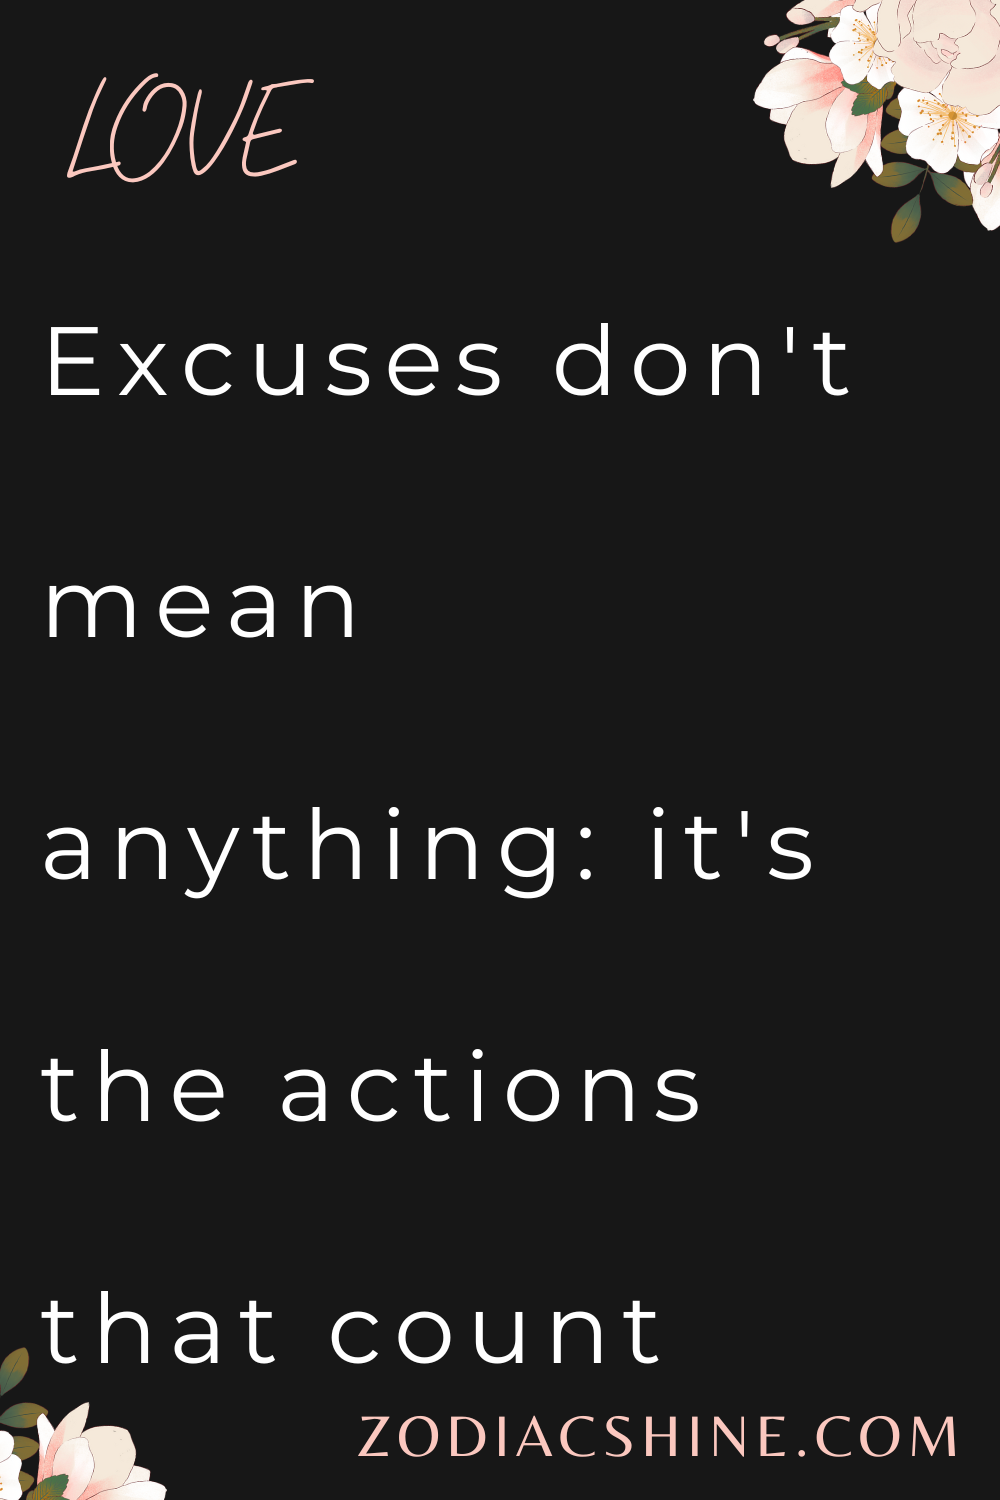 Excuses don't mean anything: it's the actions that count